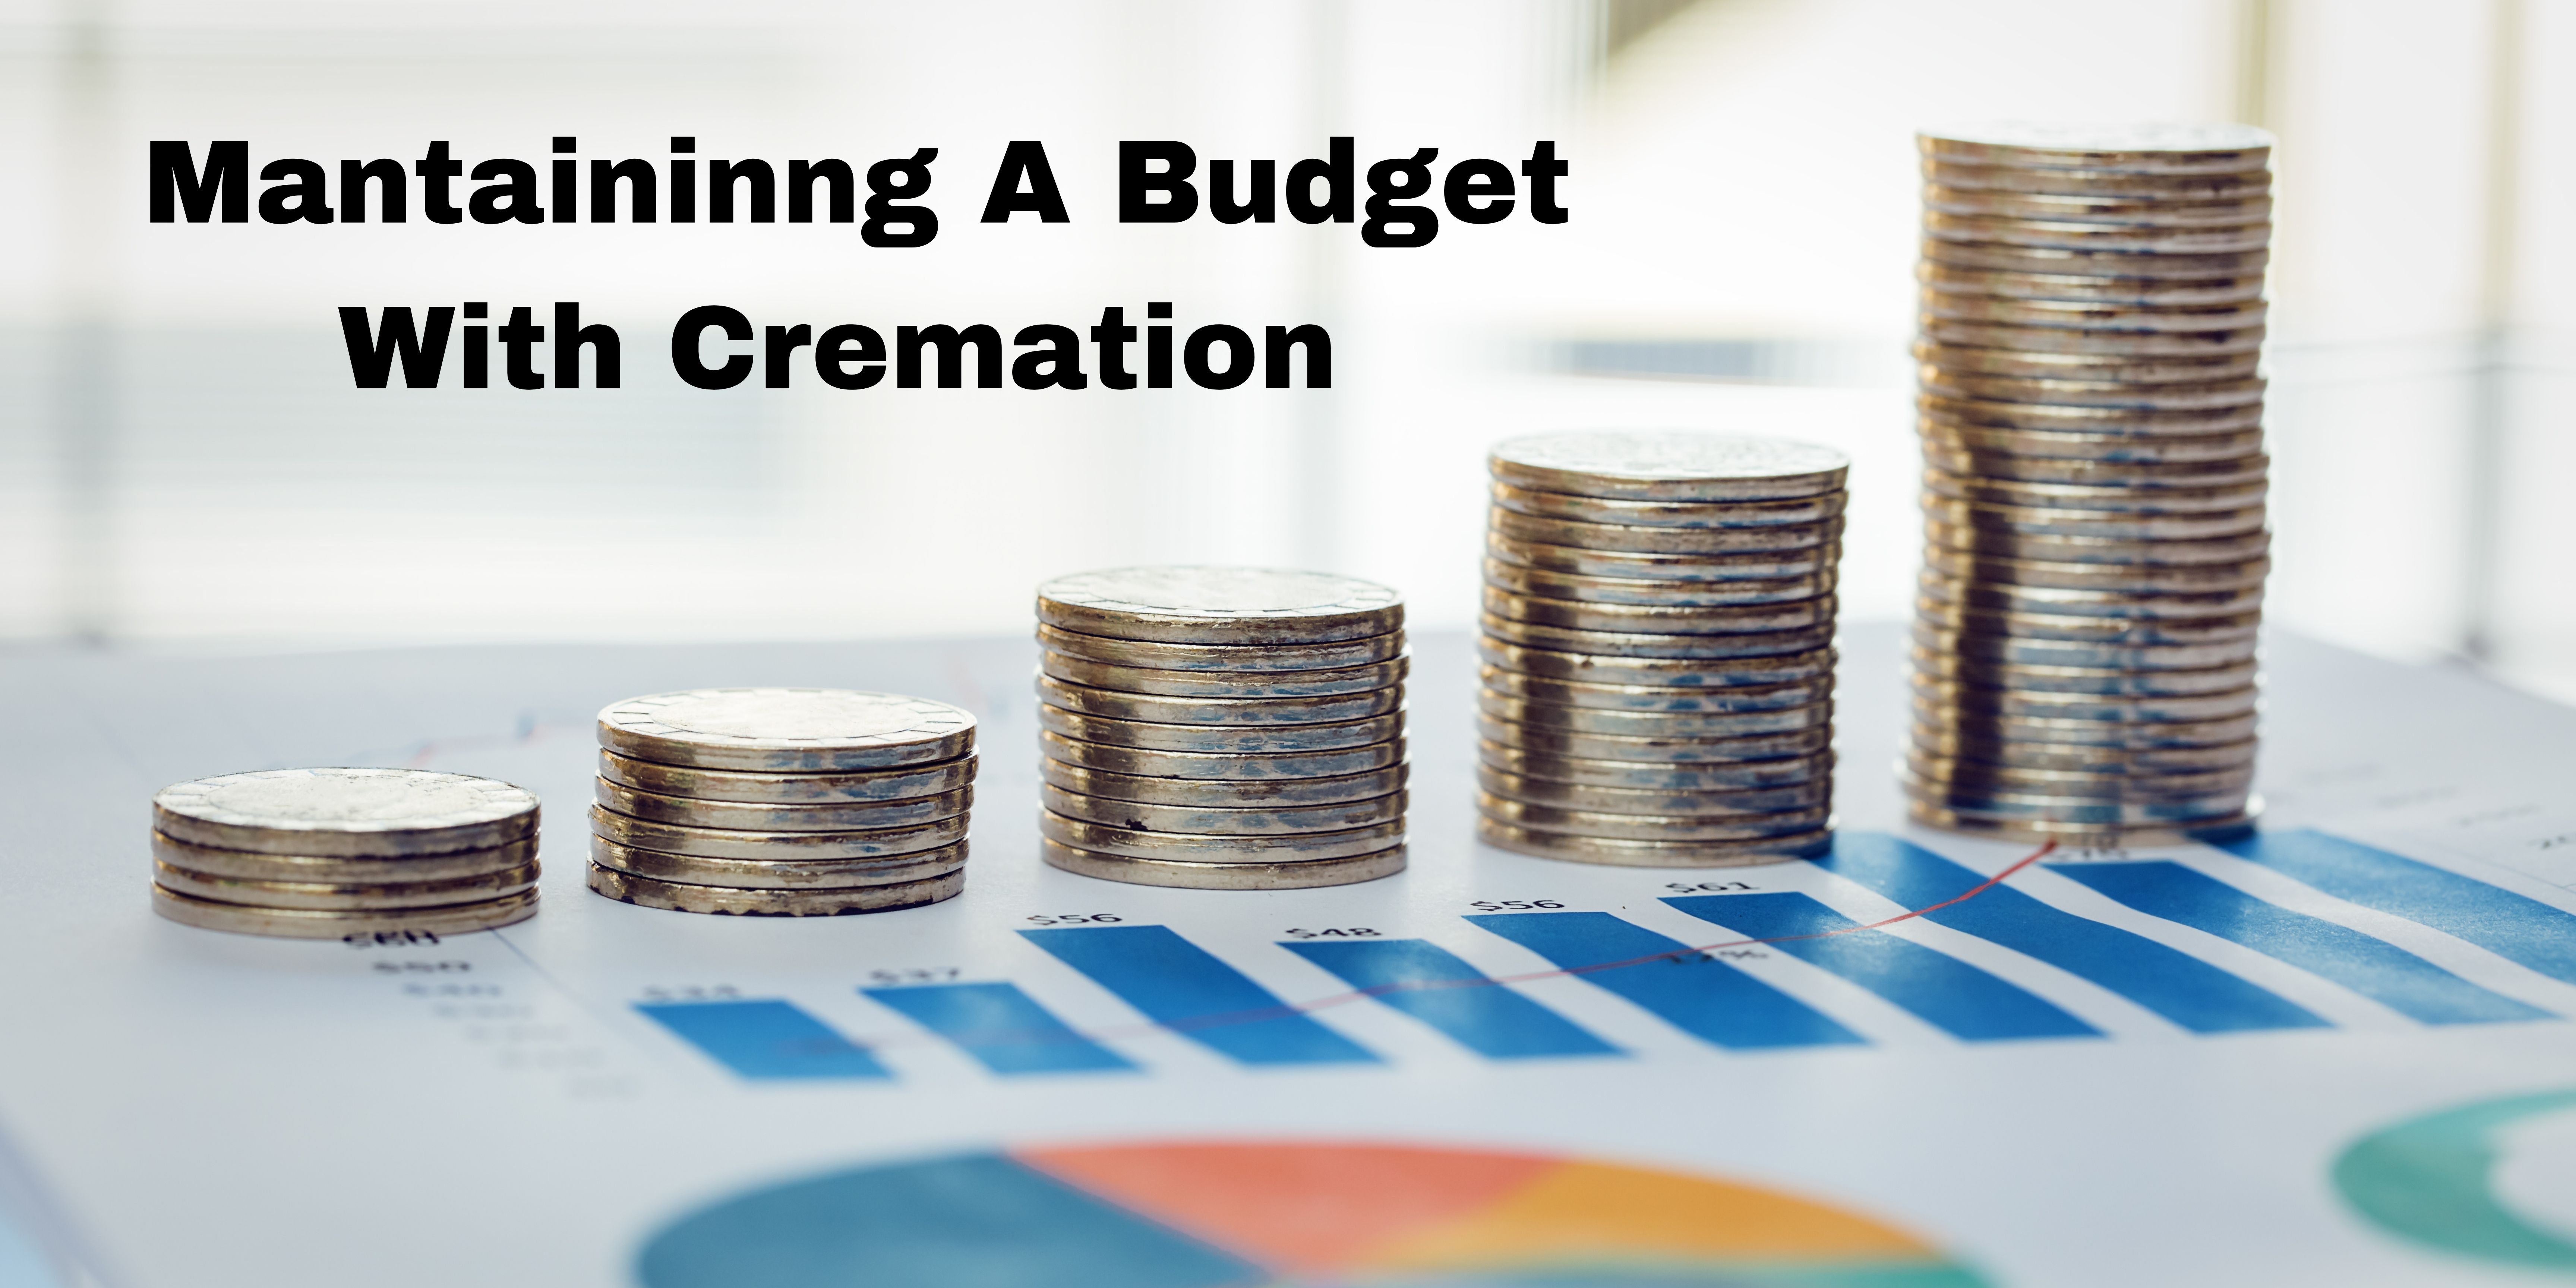 Quarters stacked into 5 vertical piles to mimic a graph. "Maintaining a Budget with Cremation".